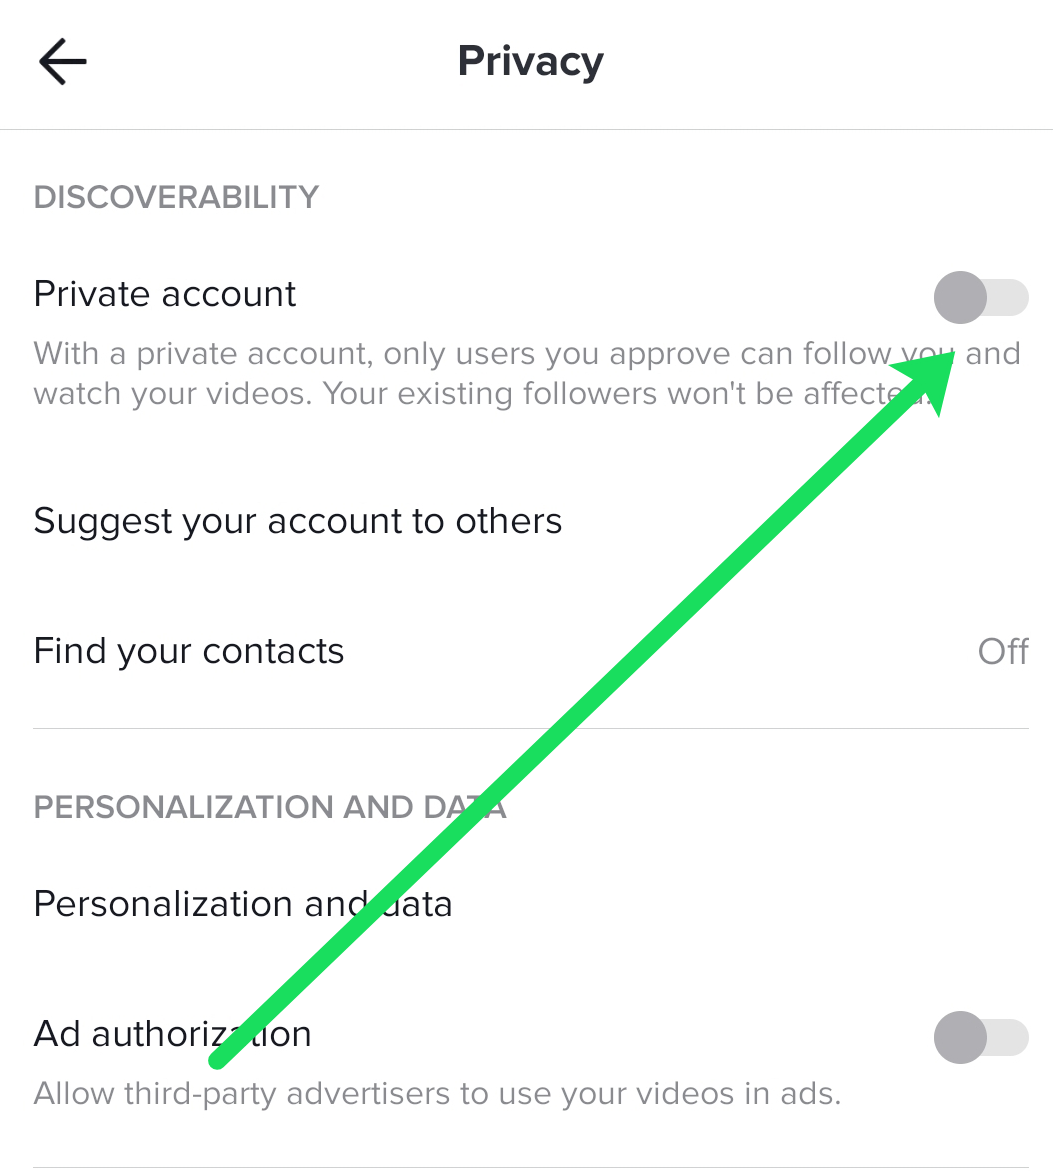 How to Watch TikTok Anonymously in 2022 (Incognito Mode